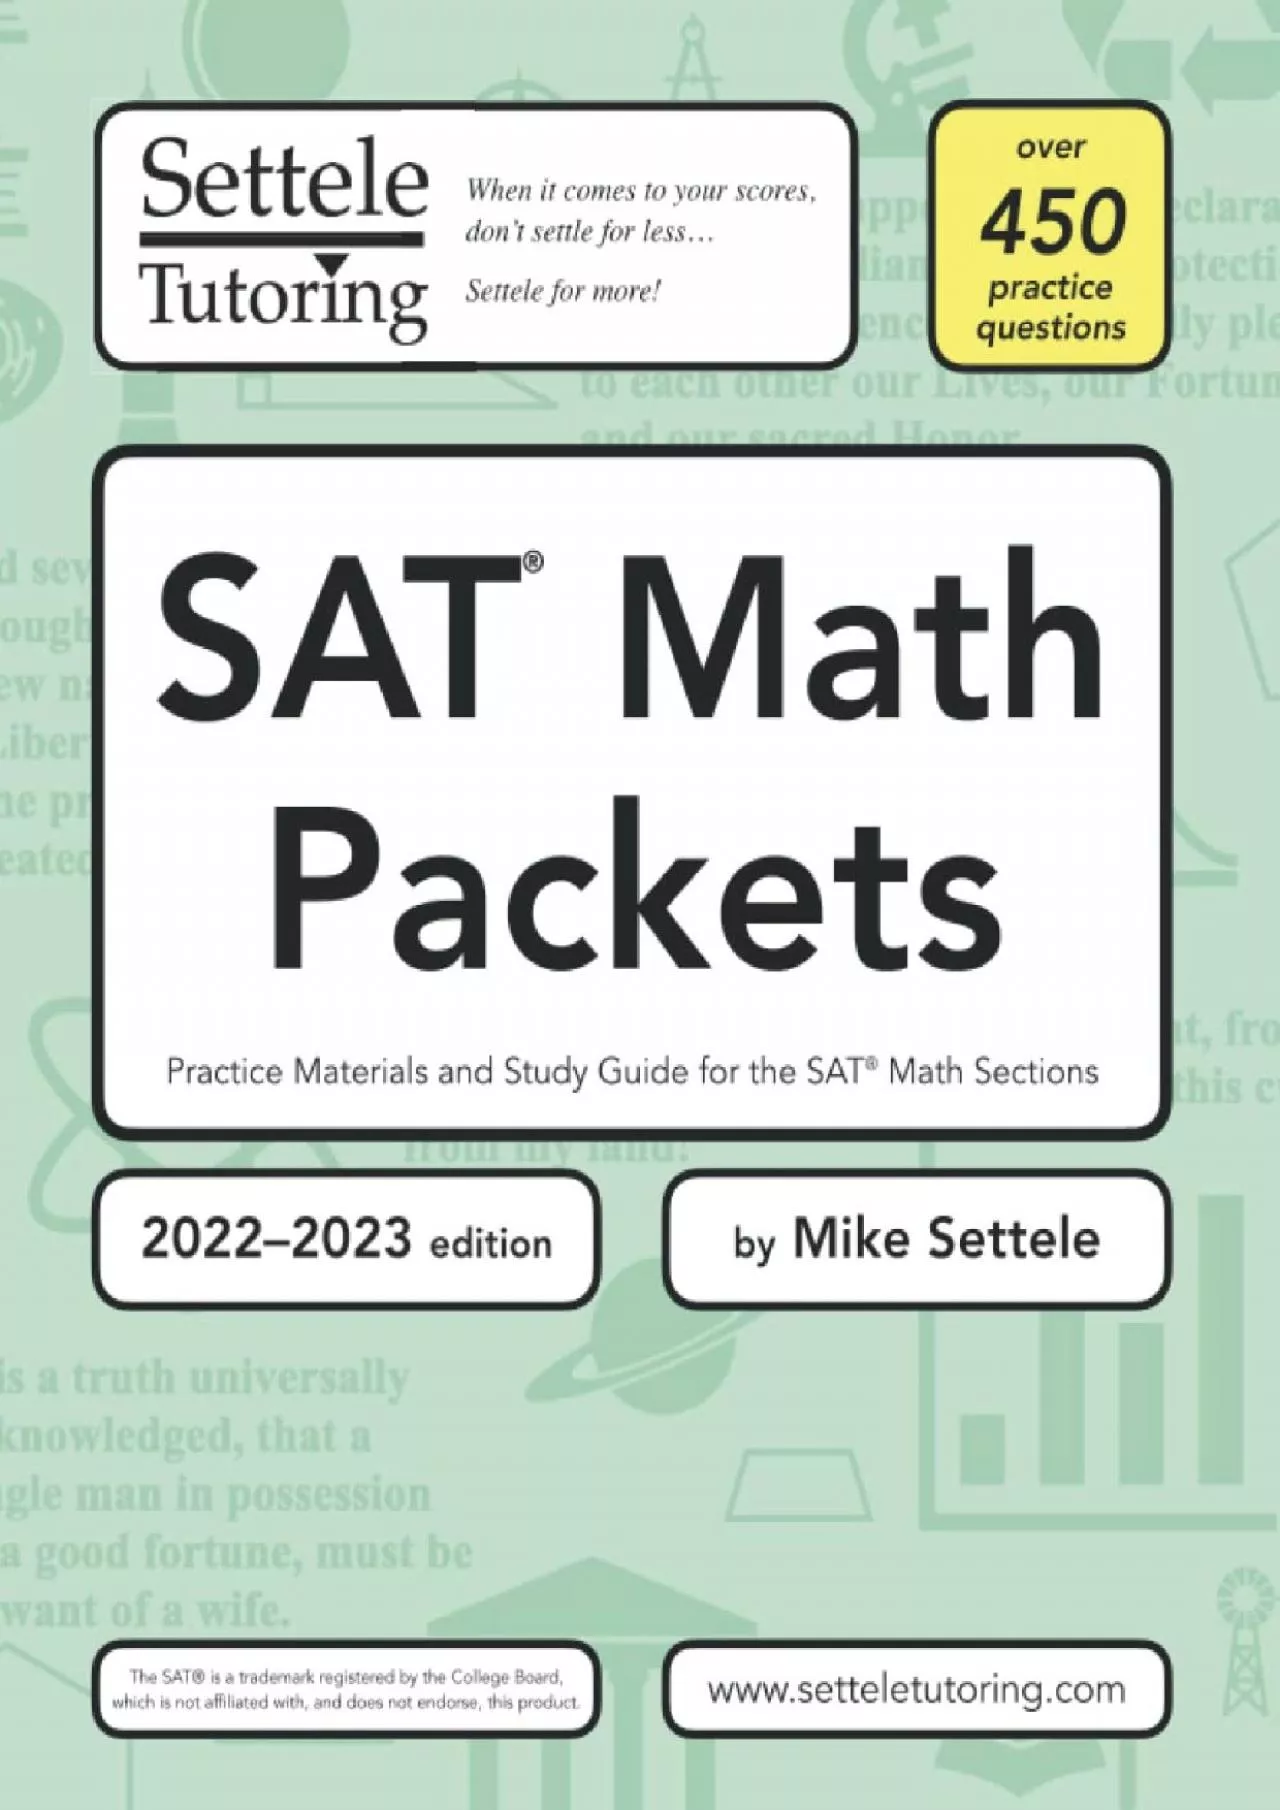 [EBOOK] SAT Math Packets 2022-2023 edition: Practice Materials and Study Guide for the